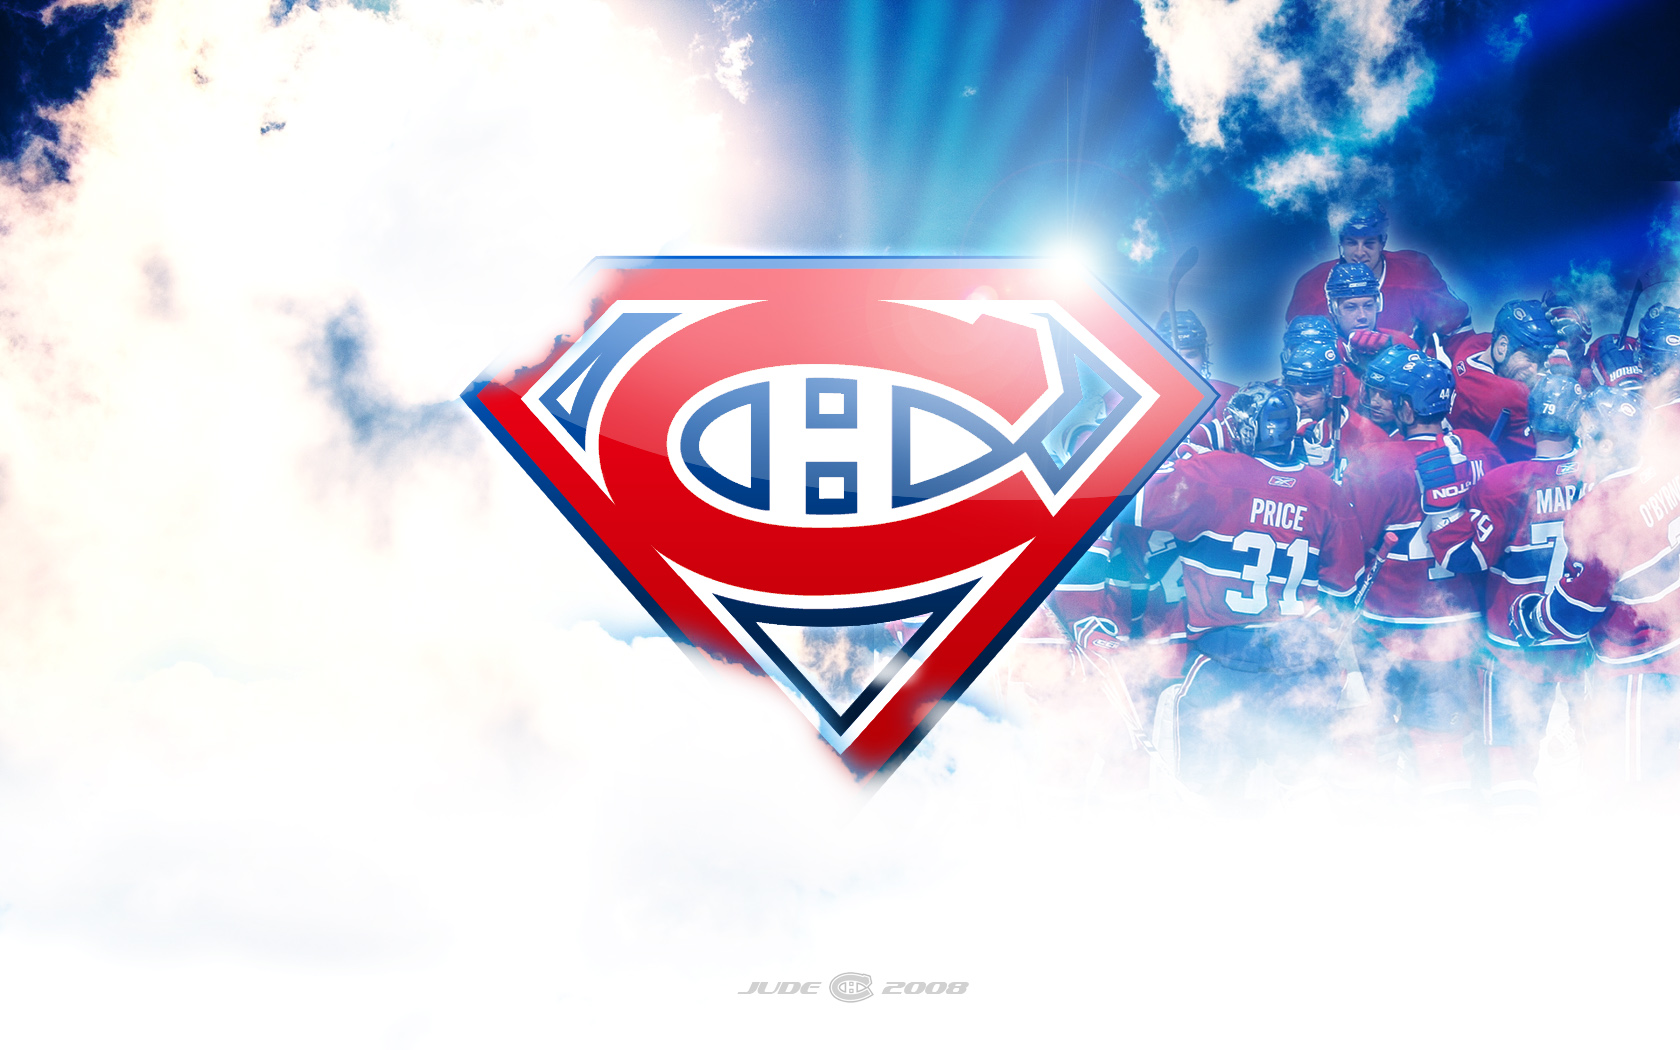 Montreal Canadiens Wallpaper Background